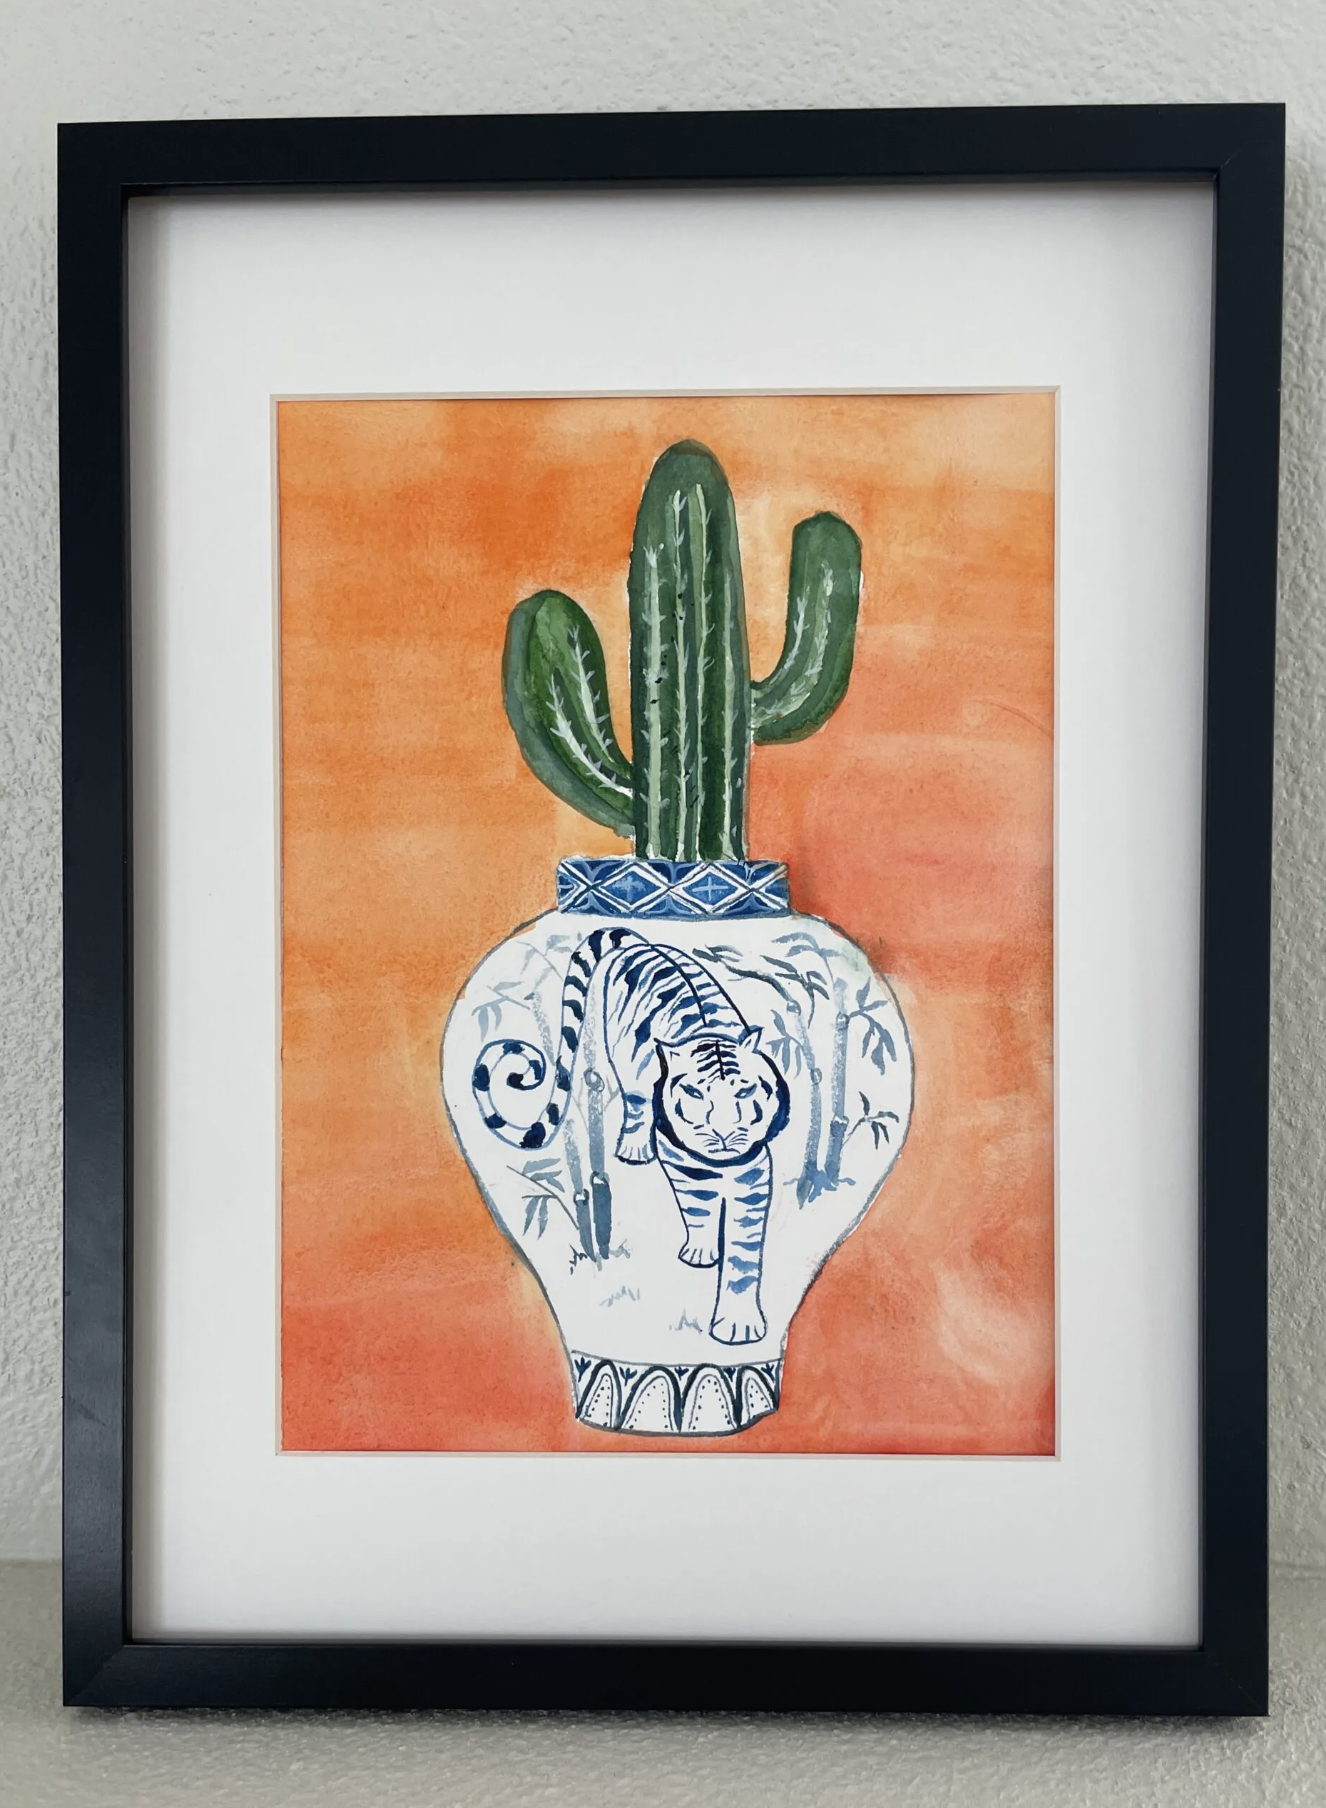 watercolor painting of a cactus inside a vase showing a tiger in black frame.